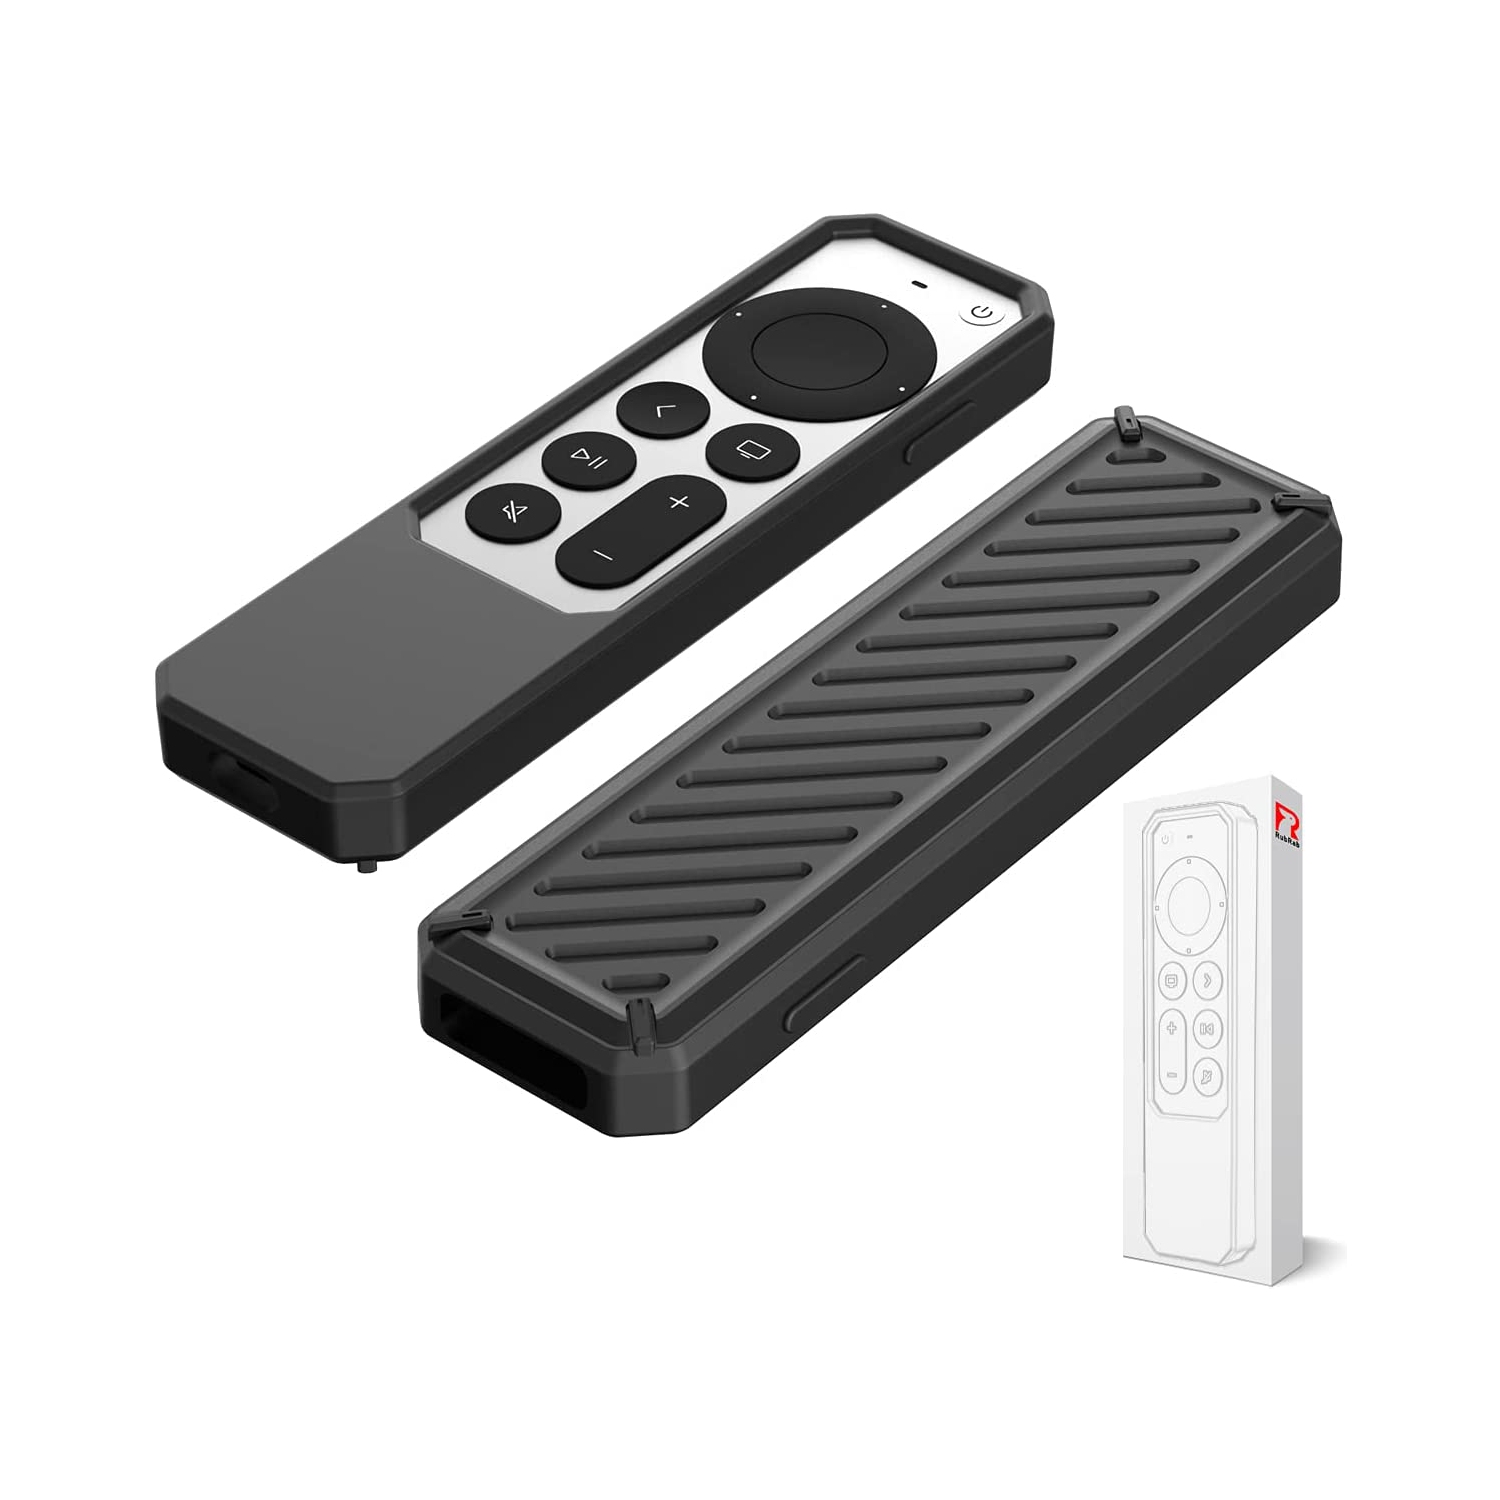 2021 Protective Case for Siri Remote Control Anti-Slip Durable Silicone Shockproof Rubber Cover for Apple 4K HD TV Siri Remote (2nd Generation Applicable) Classic Design (Black)